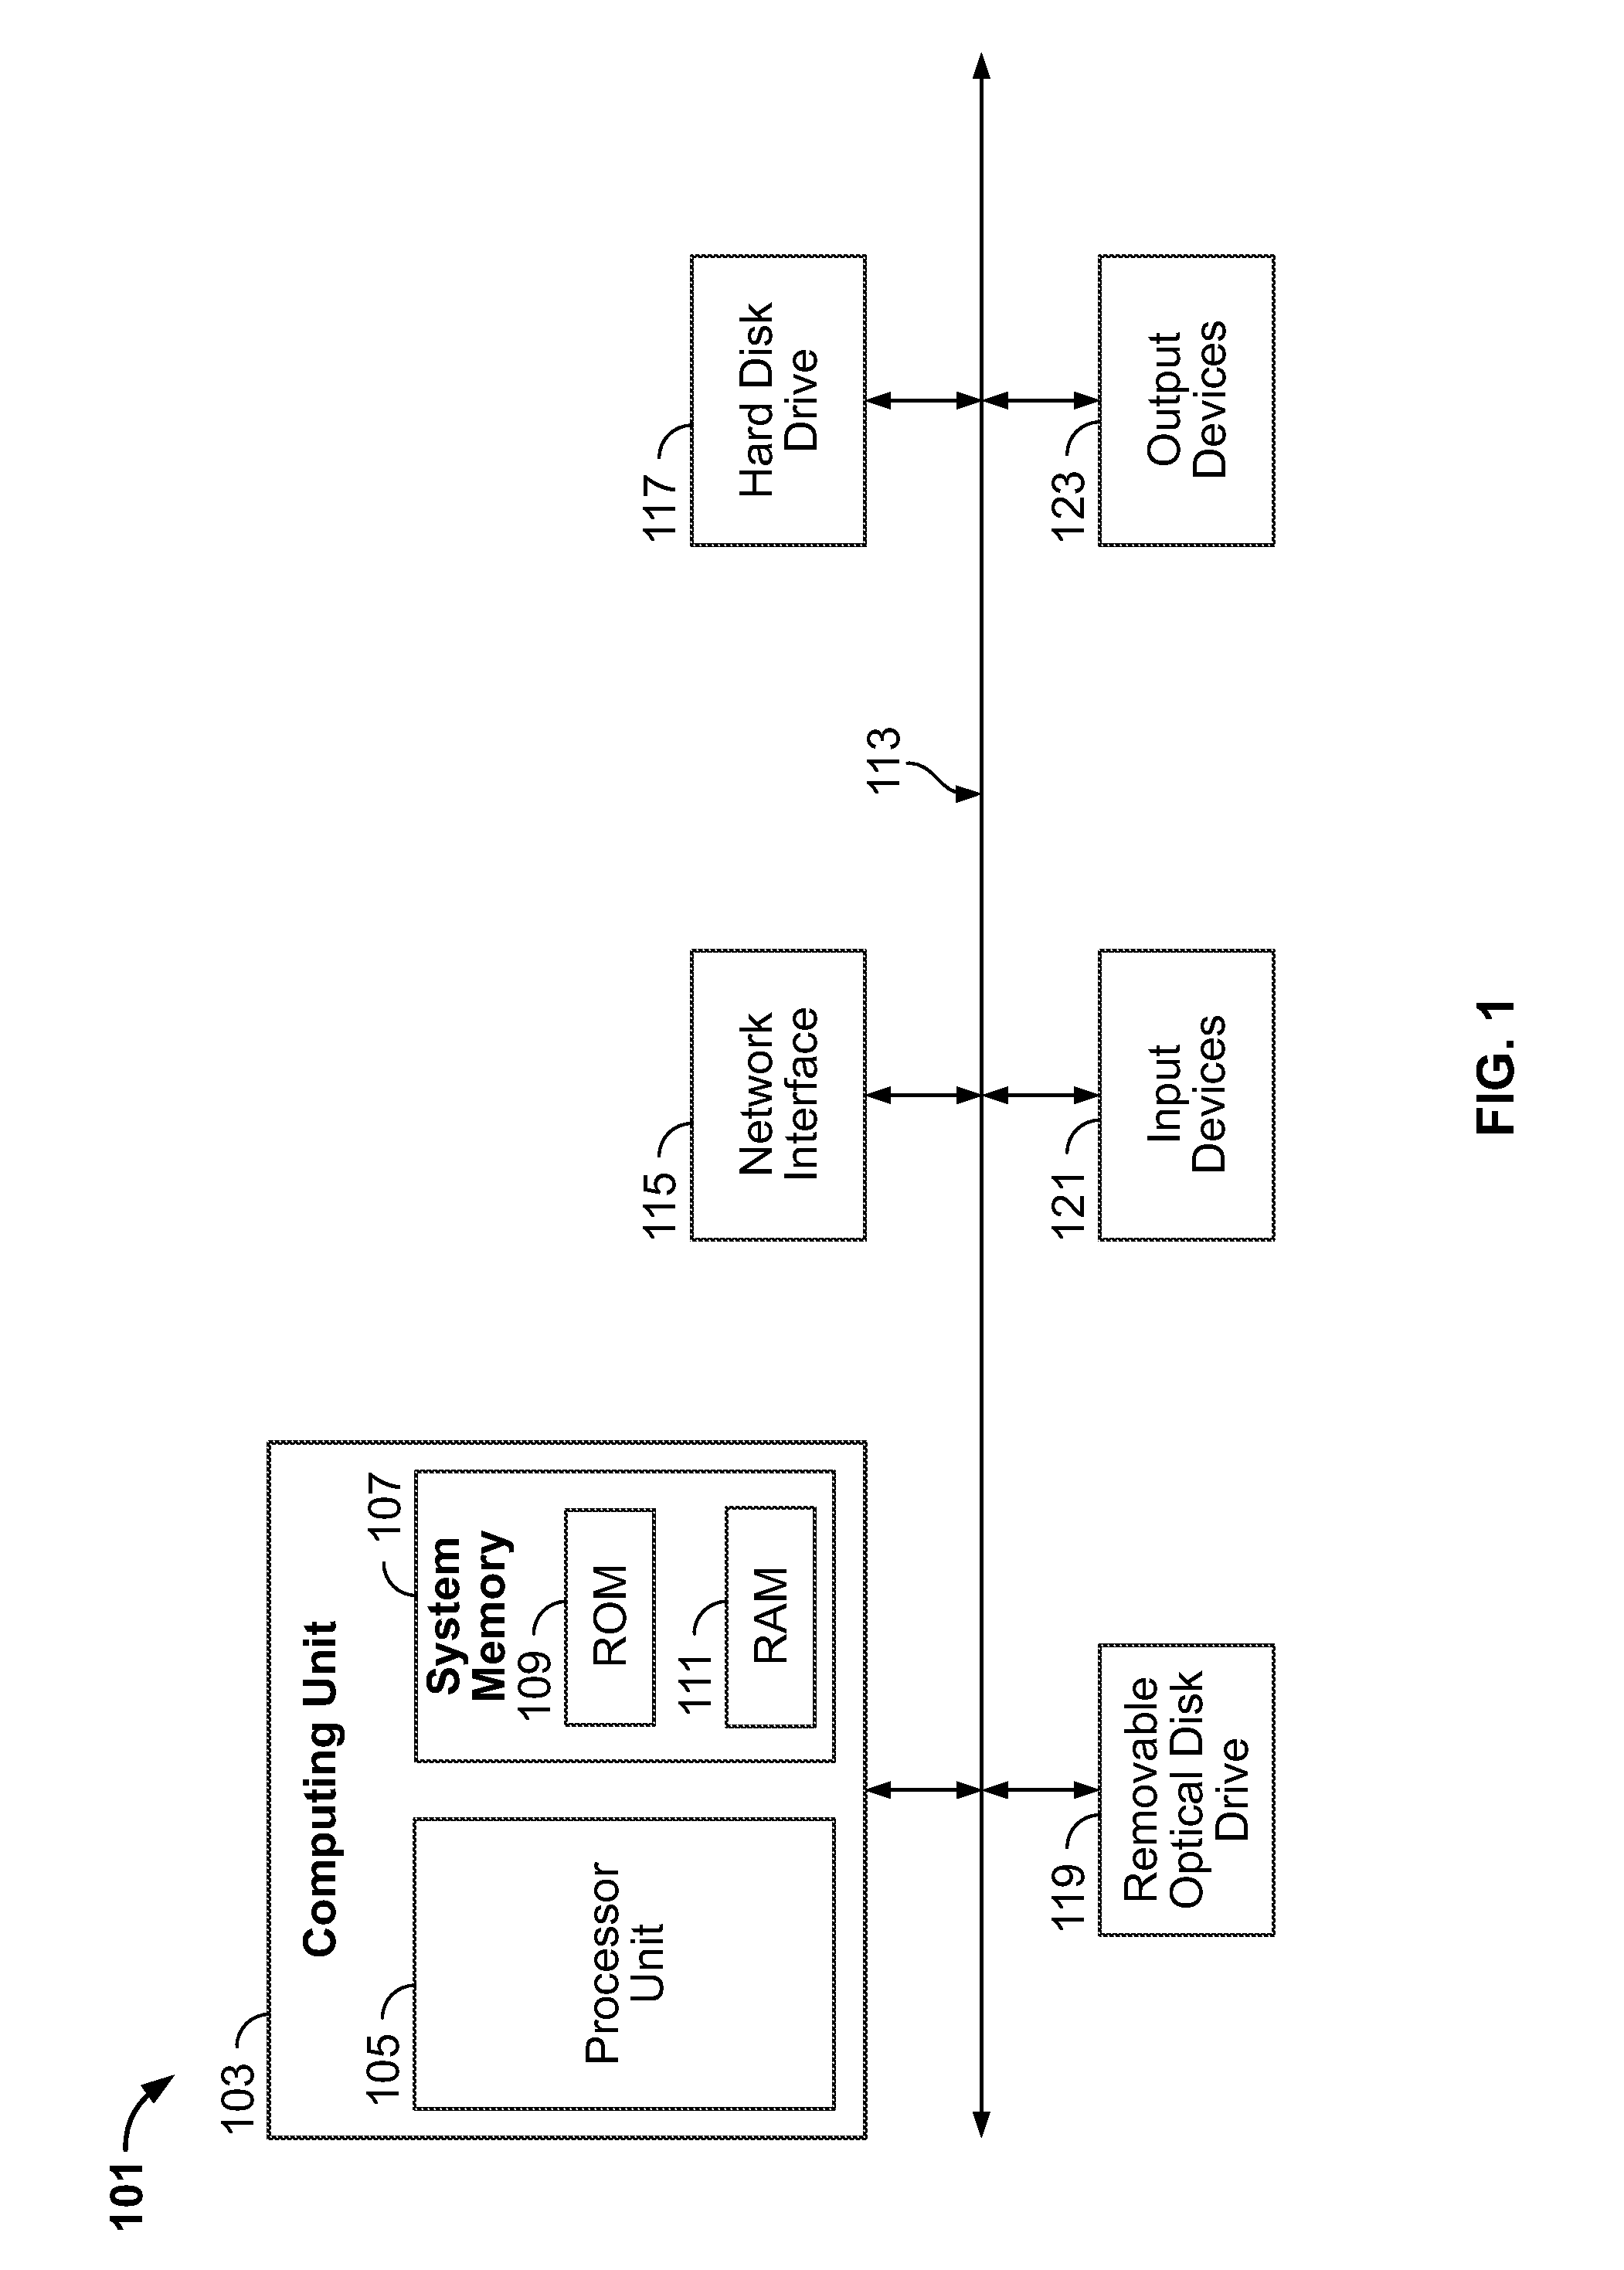 Athletic performance user interface for mobile device